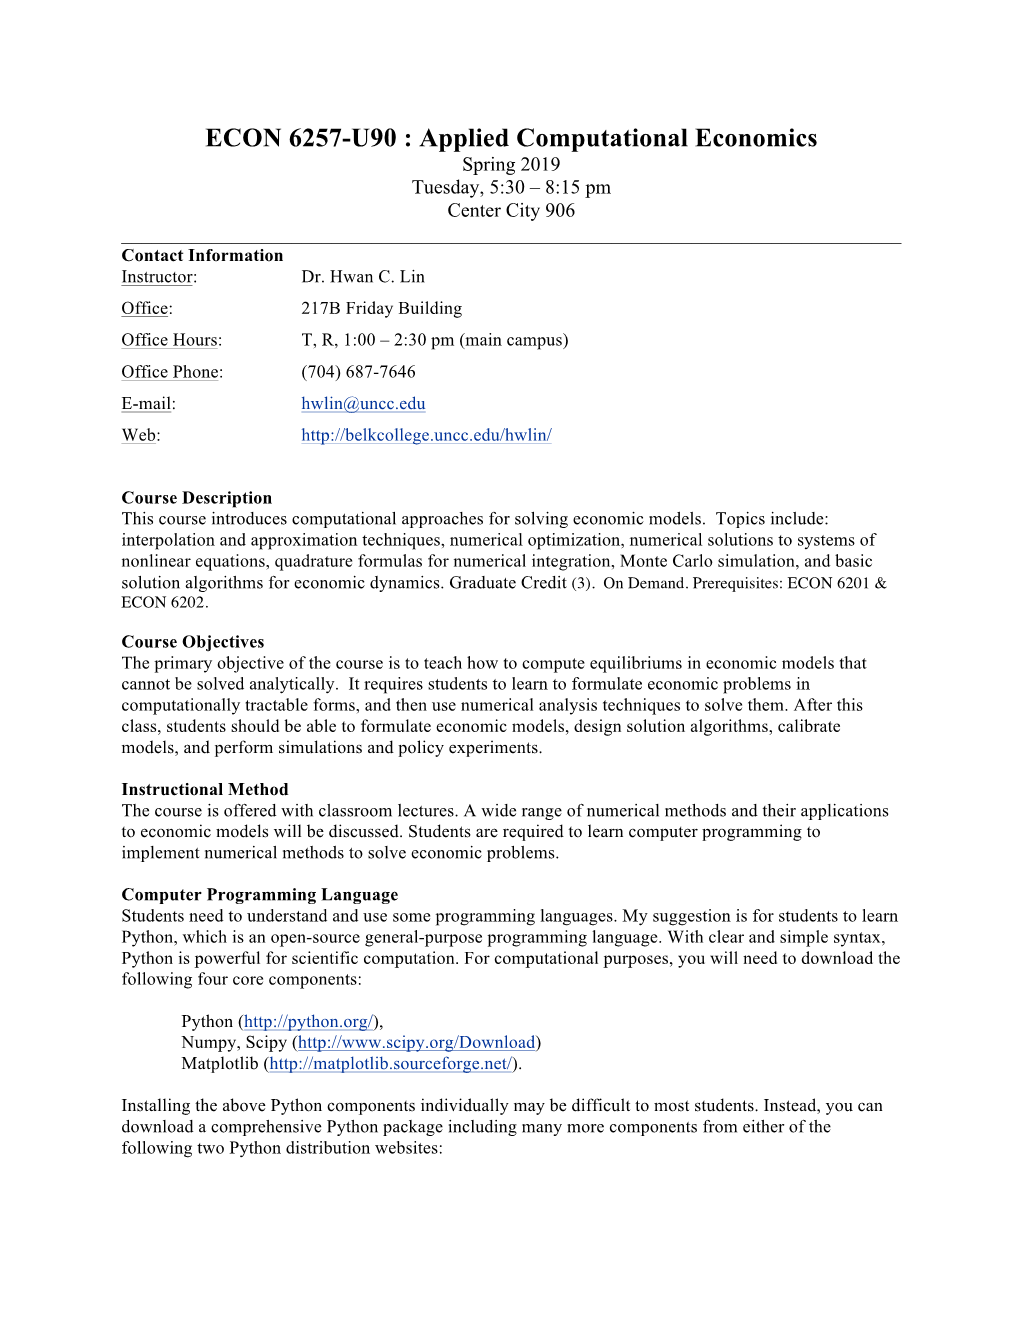 Applied Computational Economics Spring 2019 Tuesday, 5:30 – 8:15 Pm Center City 906 ______Contact Information Instructor: Dr